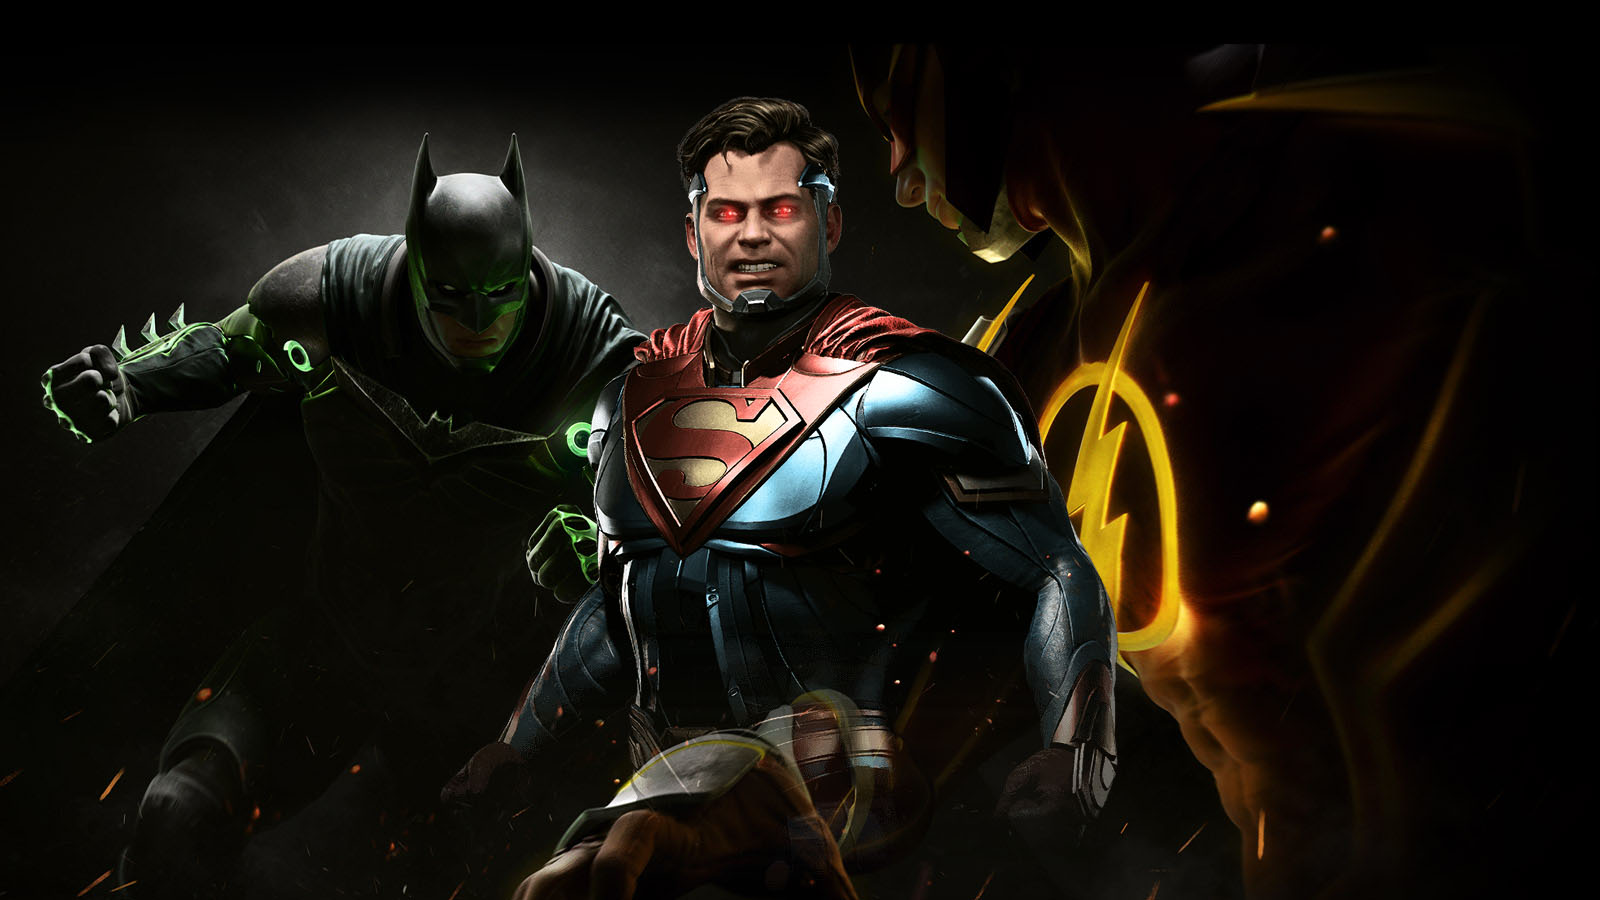 Injustice Animated Movie Release Date Revealed | GGRecon